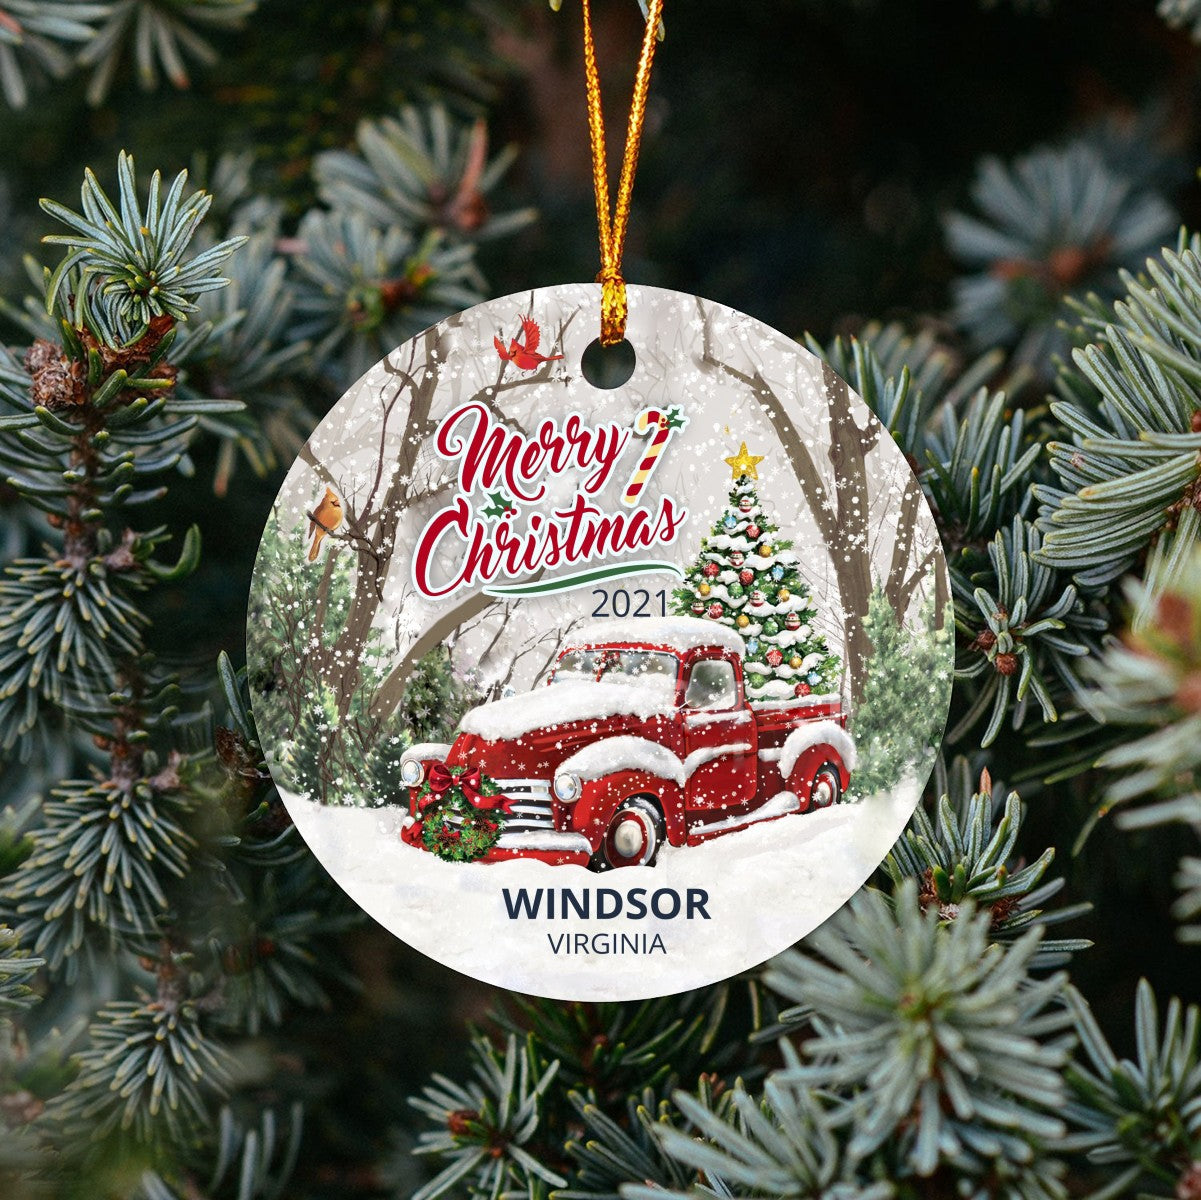 Christmas Tree Ornaments Windsor - Ornament With Name City, State Windsor Virginia VA Ornament - Red Truck Xmas Ornaments 3'' Plastic Gift For Family, Friend And Housewarming